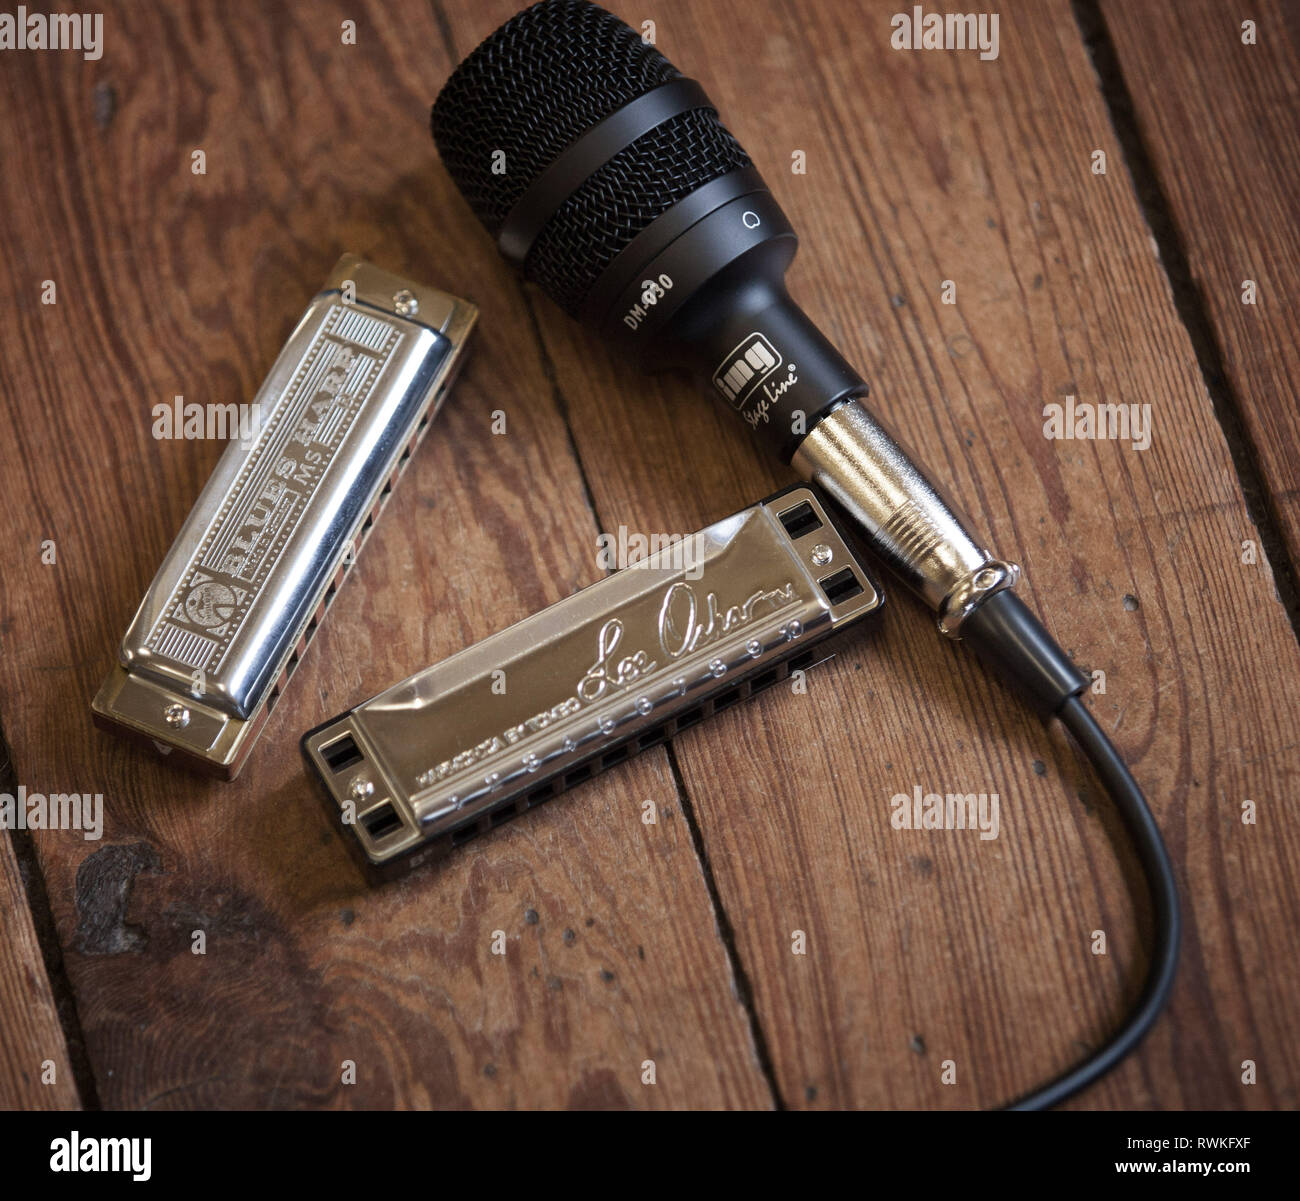 Hohner blues harp harmonica and Lee Oscar harmonica with img microphone on a wooden background. Stock Photo